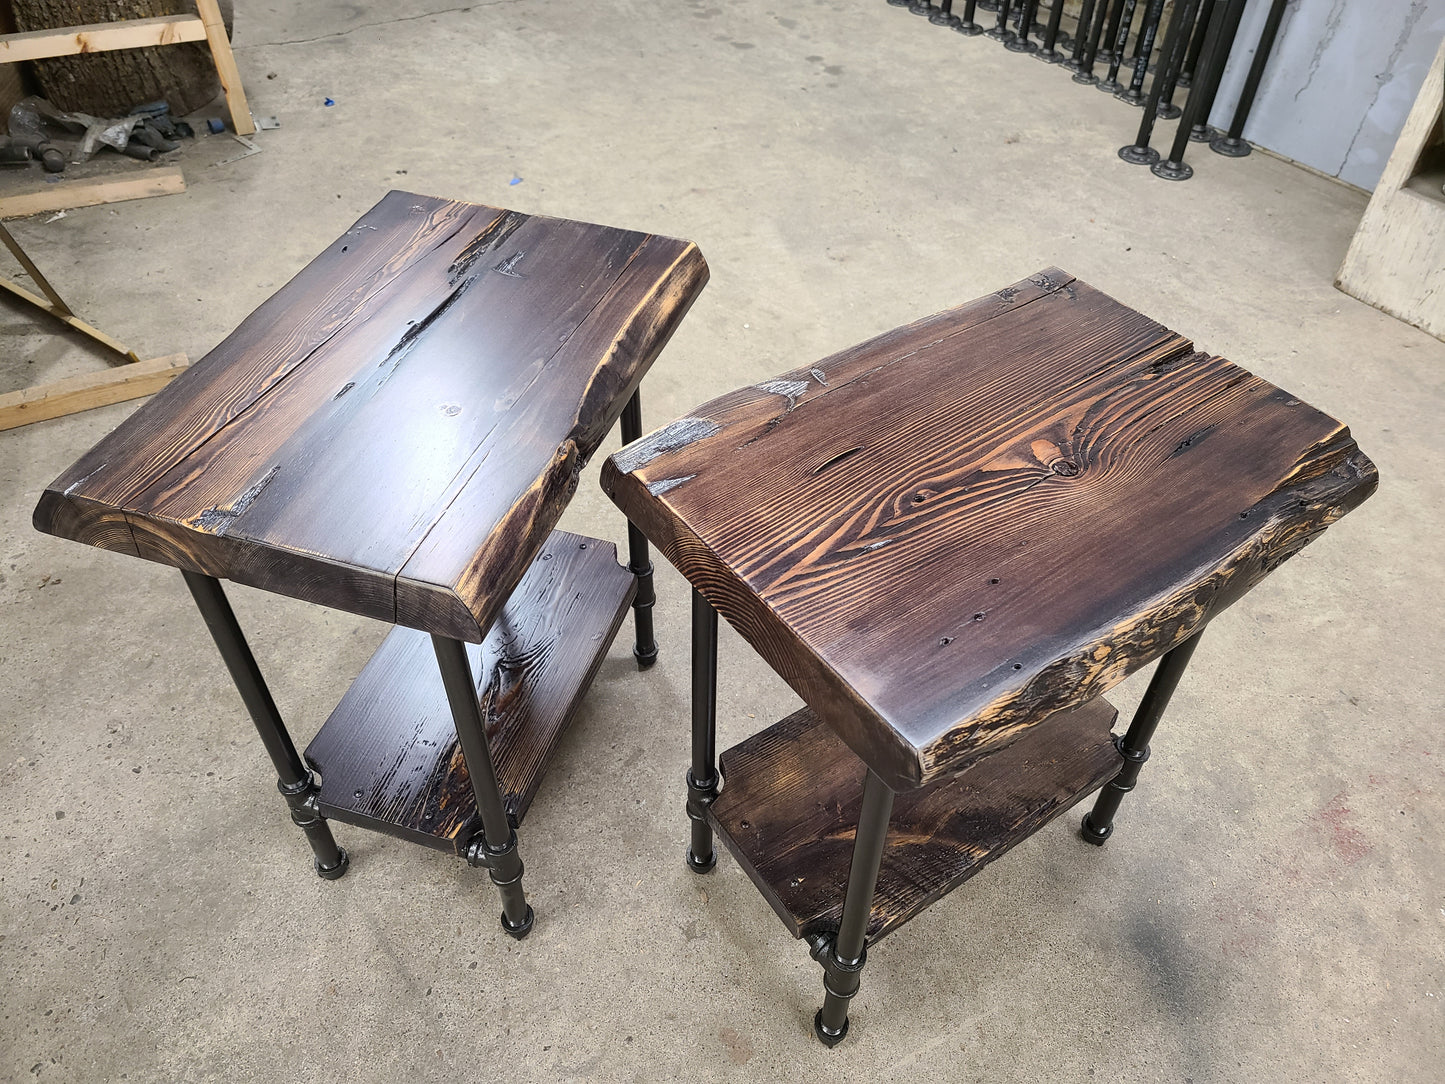 Shelf tables with Reclaimed wood, Customize your one or two shelf table, many sizes.